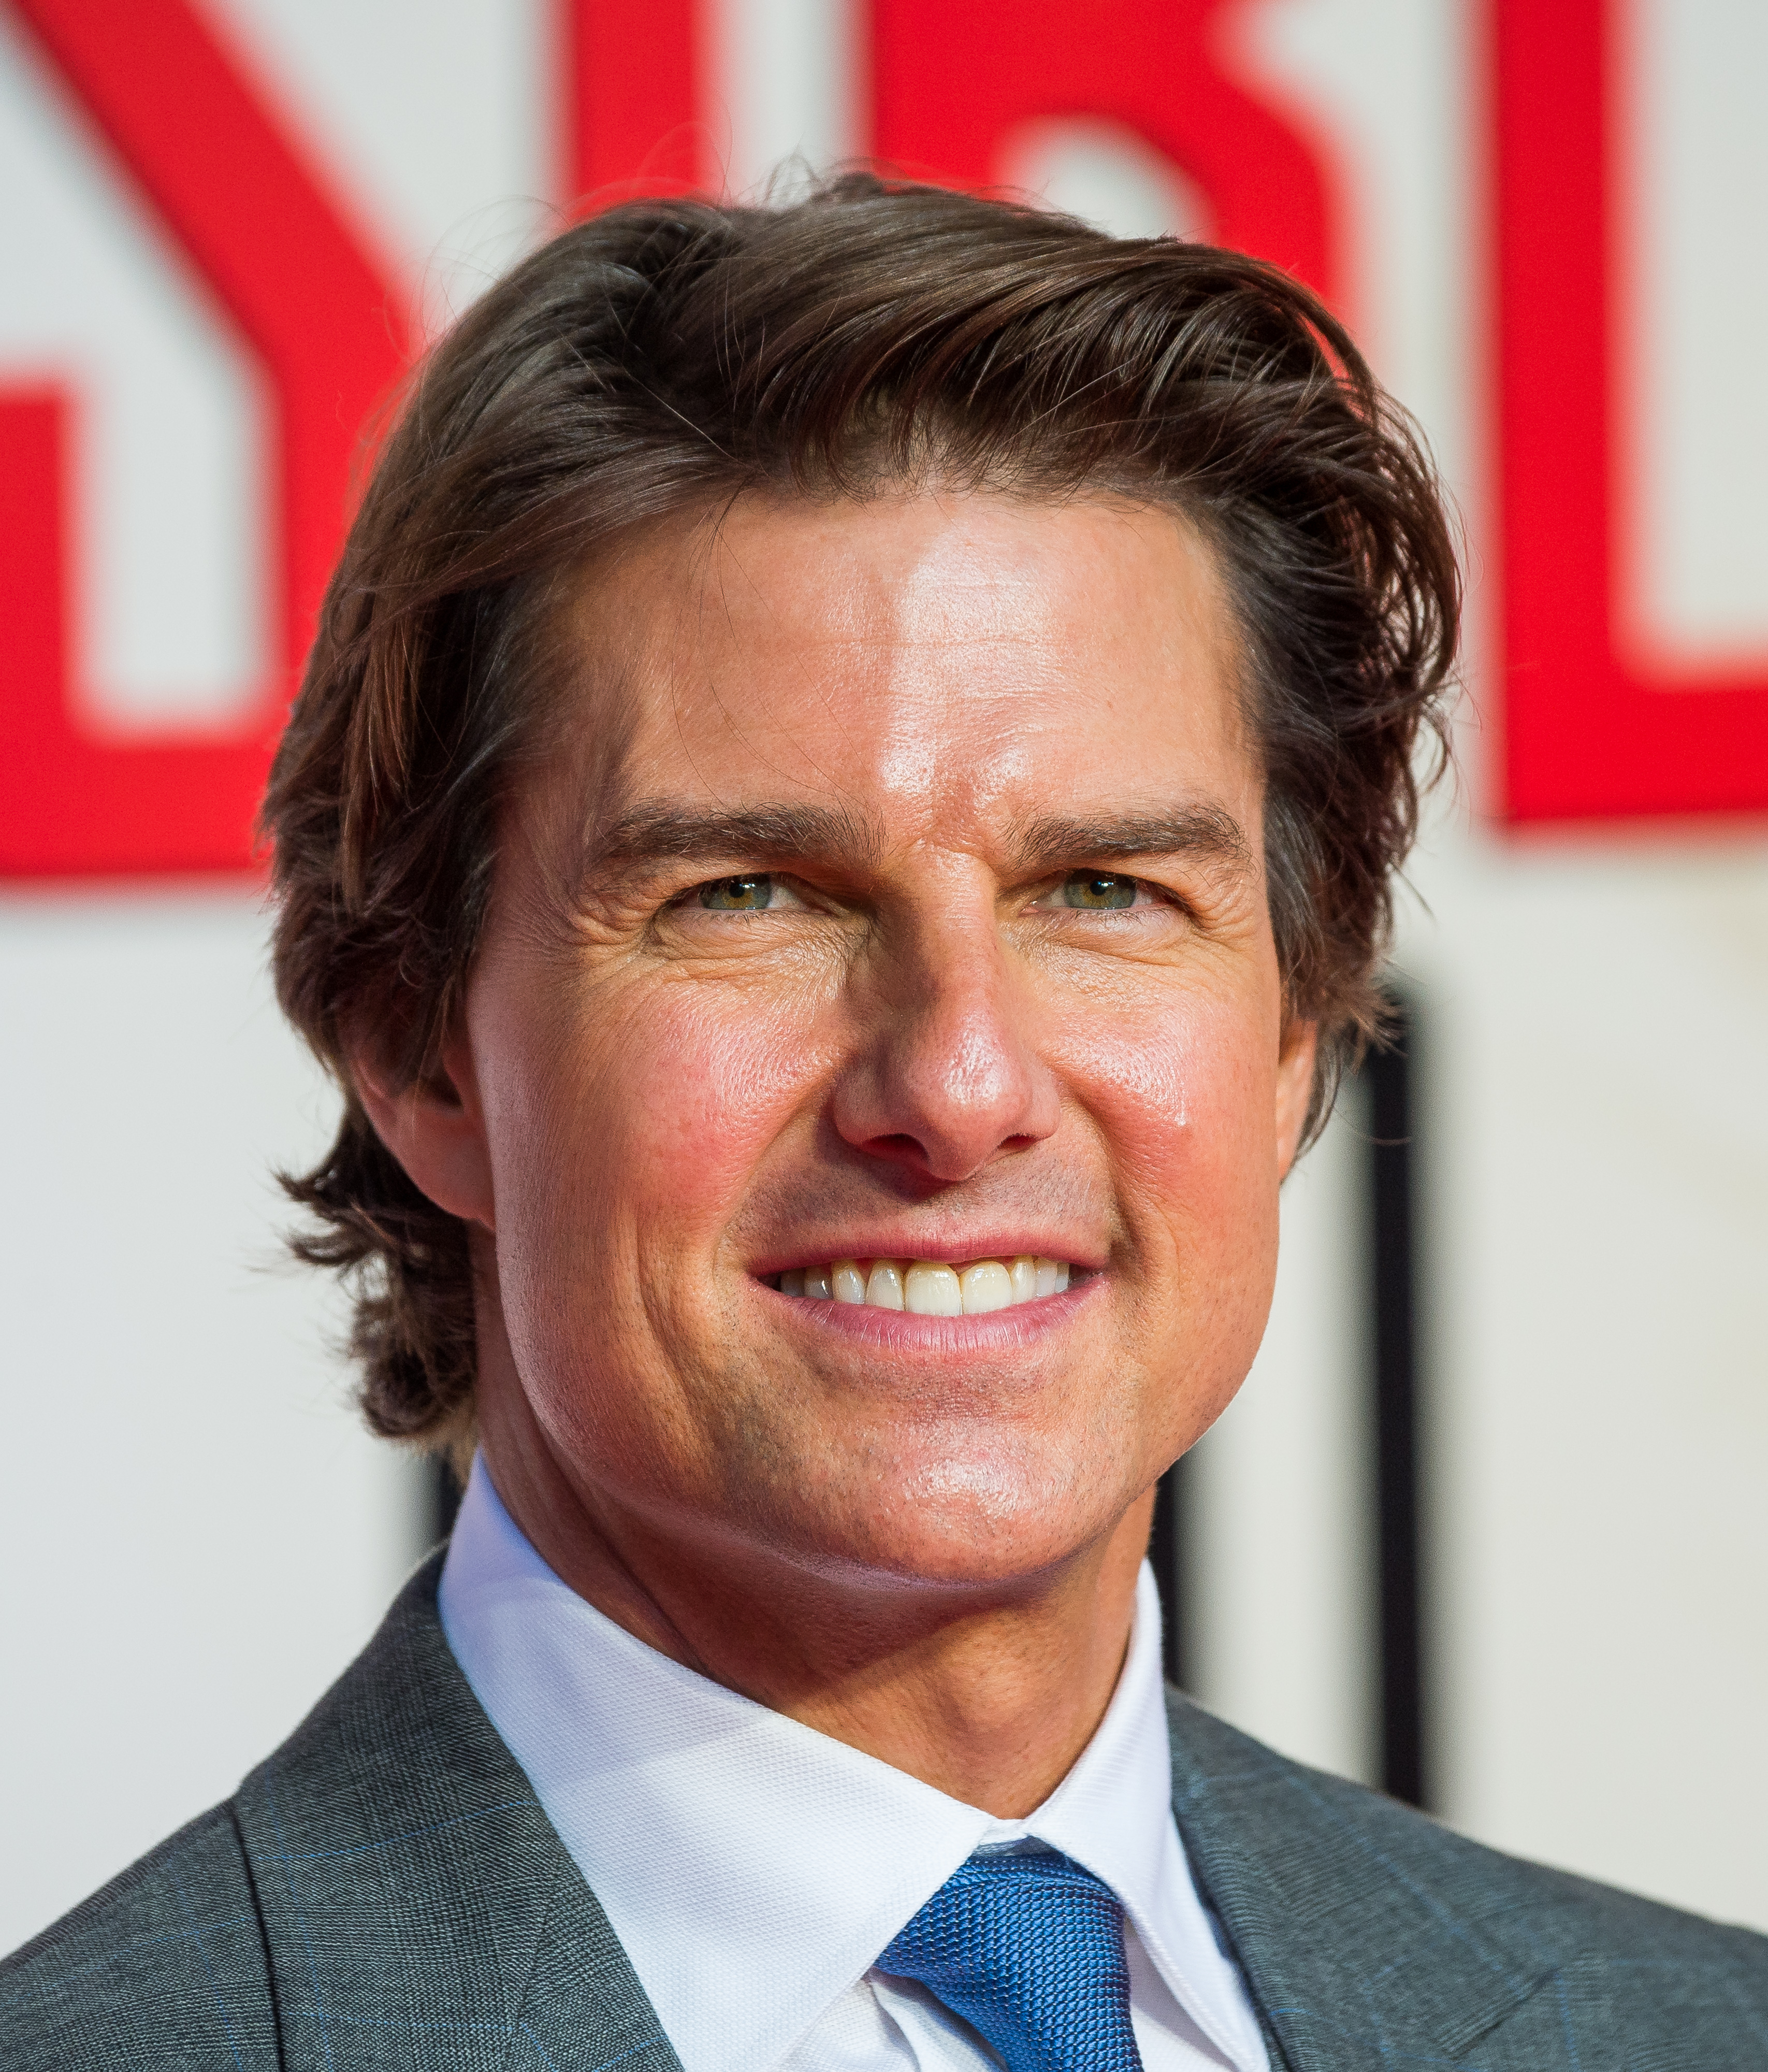 Tom Cruise attended an exclusive screening of "Mission: Impossible Rogue Nation" at BFI IMAX on July 25, 2015, in London, England. | Source: Getty Images